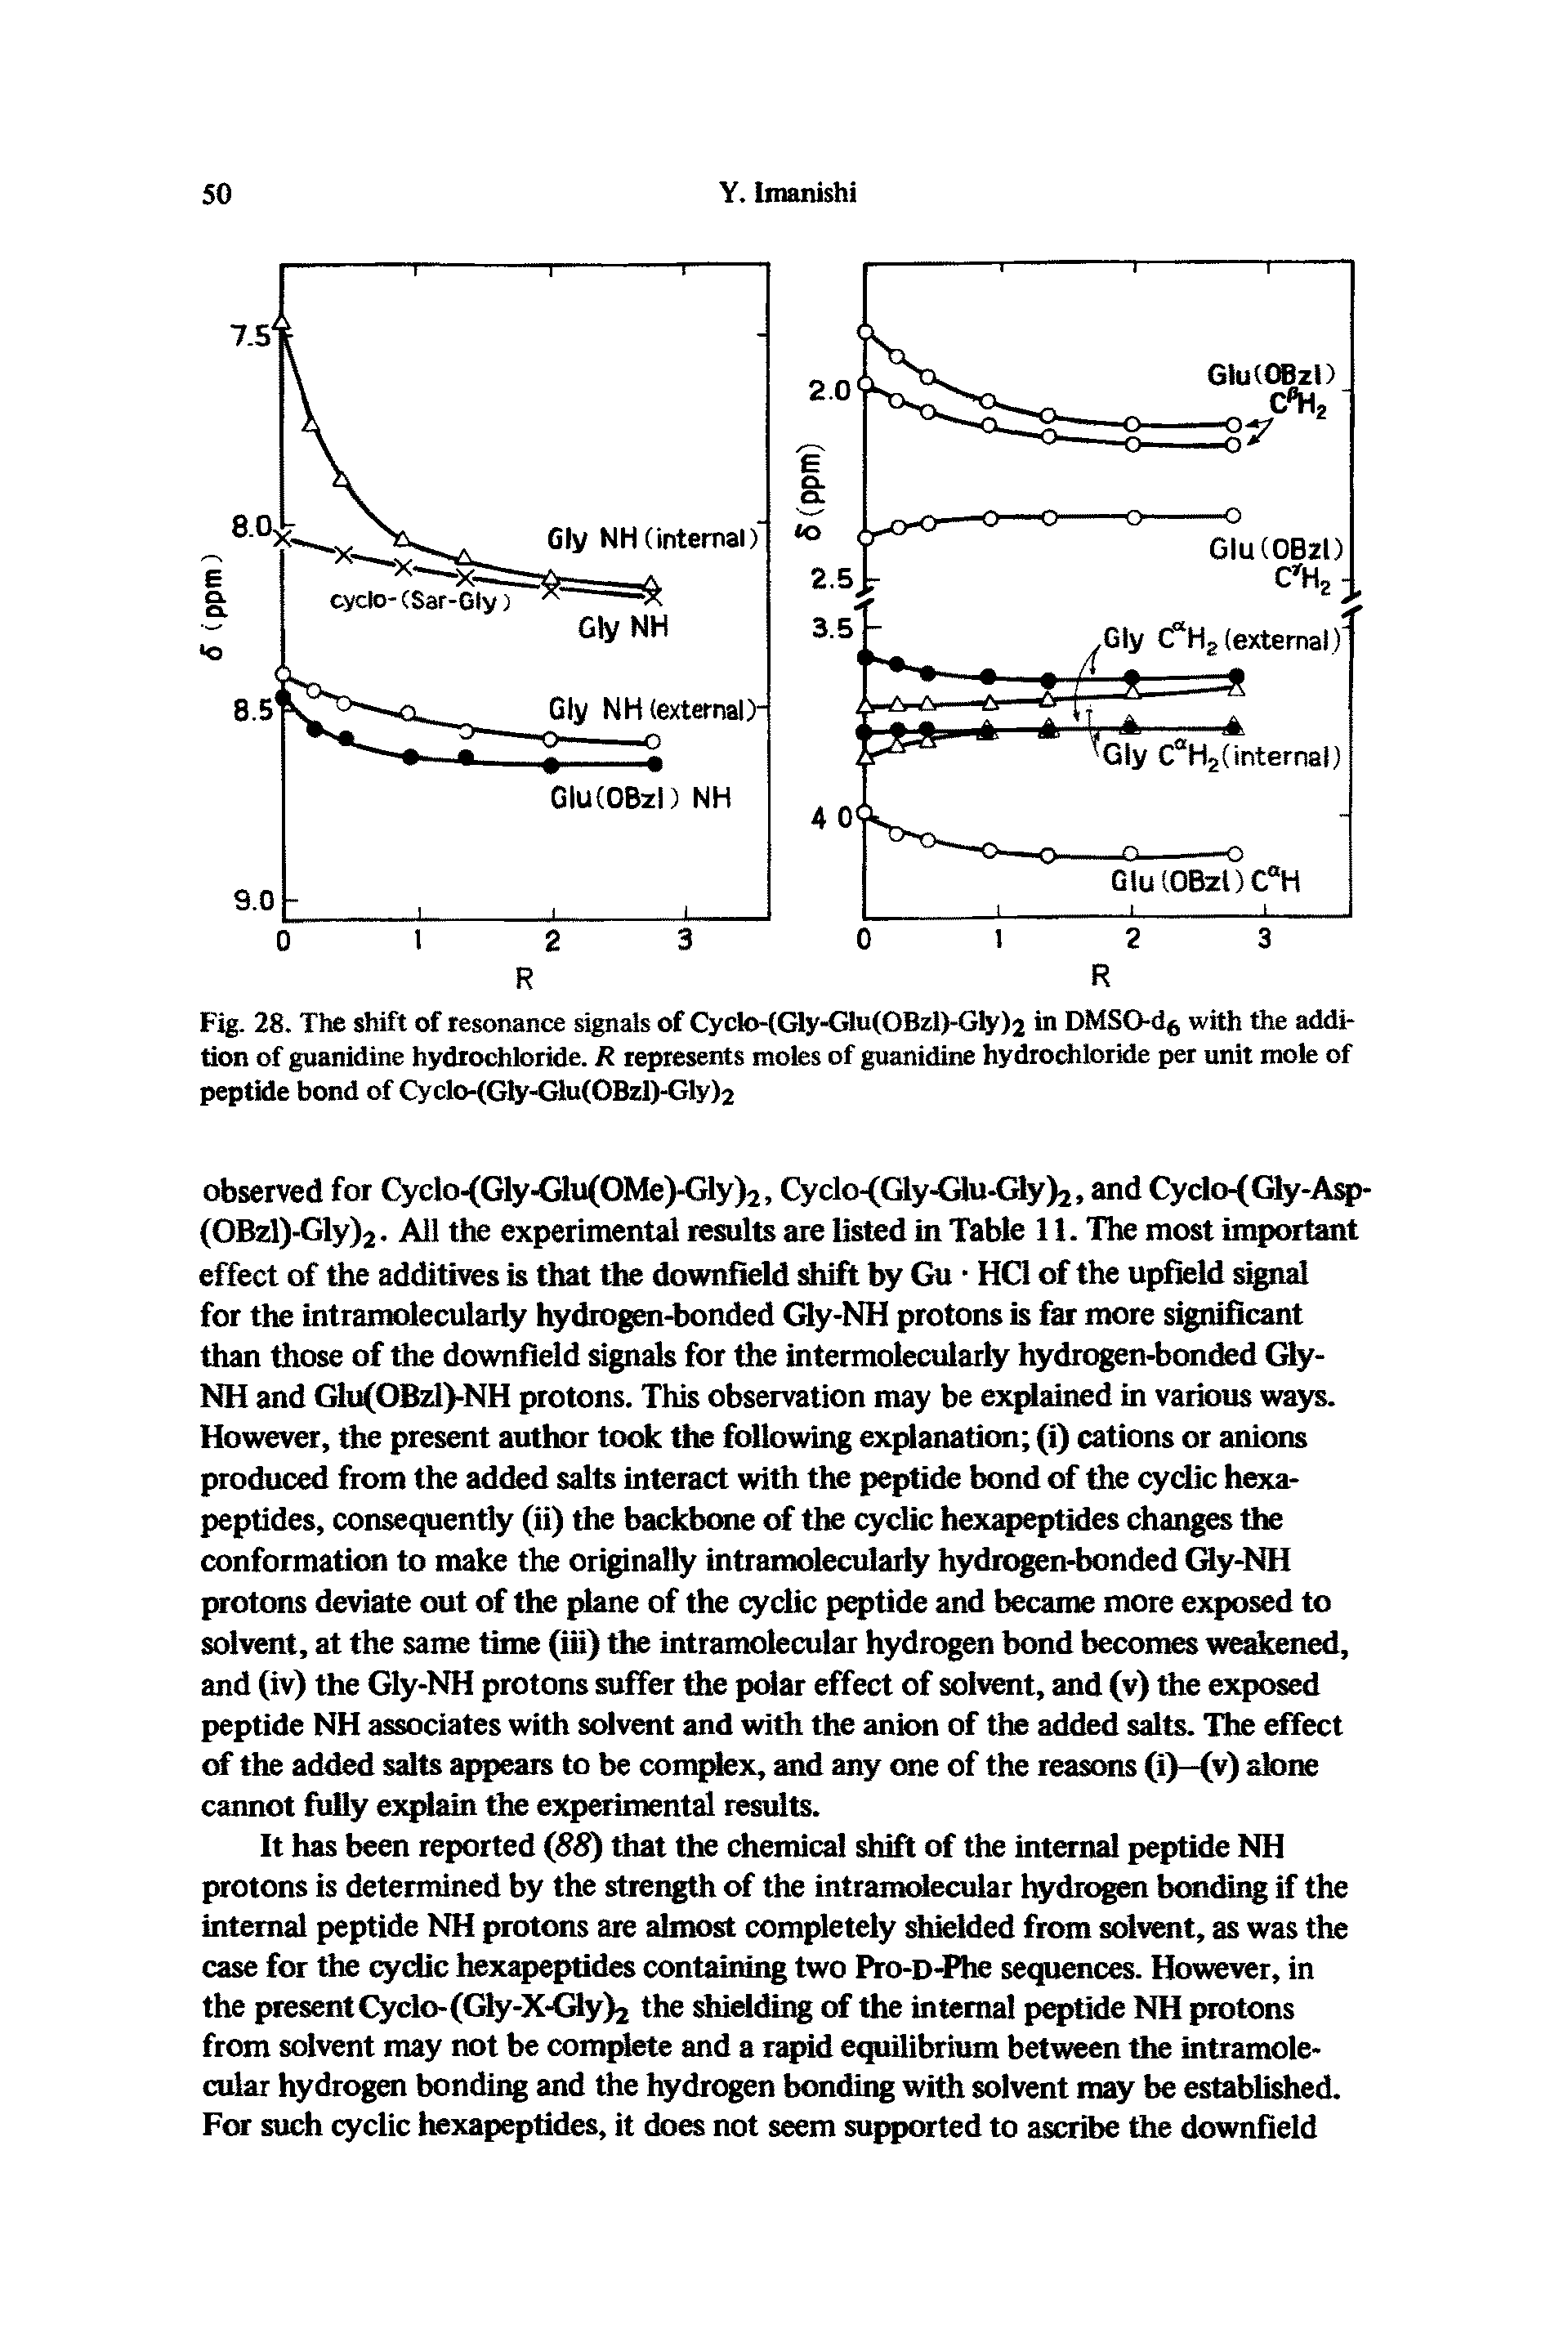 Fig. 28. The shift of resonance signals of Cyclo-(Gly-Glu(OBzl)-Gly)2 in DMSO-d with the addition of guanidine hydrochloride. R represents moles of guanidine hydrochloride per unit mole of peptide bond of Cyclo-(GIy-Glu(OBzl)-Gly)2...